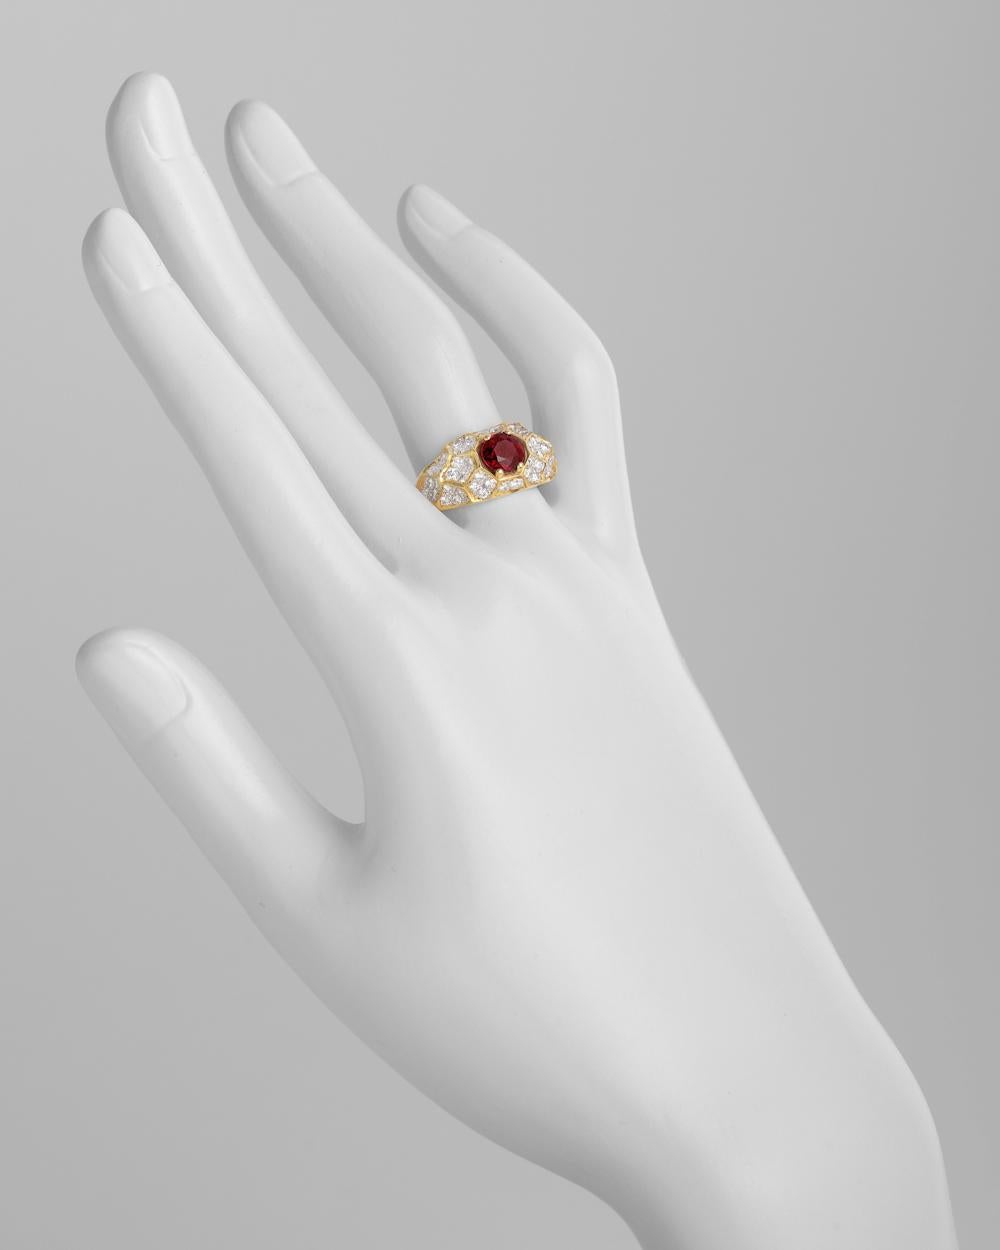 Ruby and diamond dress ring, centering a modified brilliant-cut ruby weighing 1.08 carats, with 52 pavé-set diamond accents weighing approximately 0.78 total carats, mounted in 18k yellow and white gold, the ring measuring approximately 10mm wide at